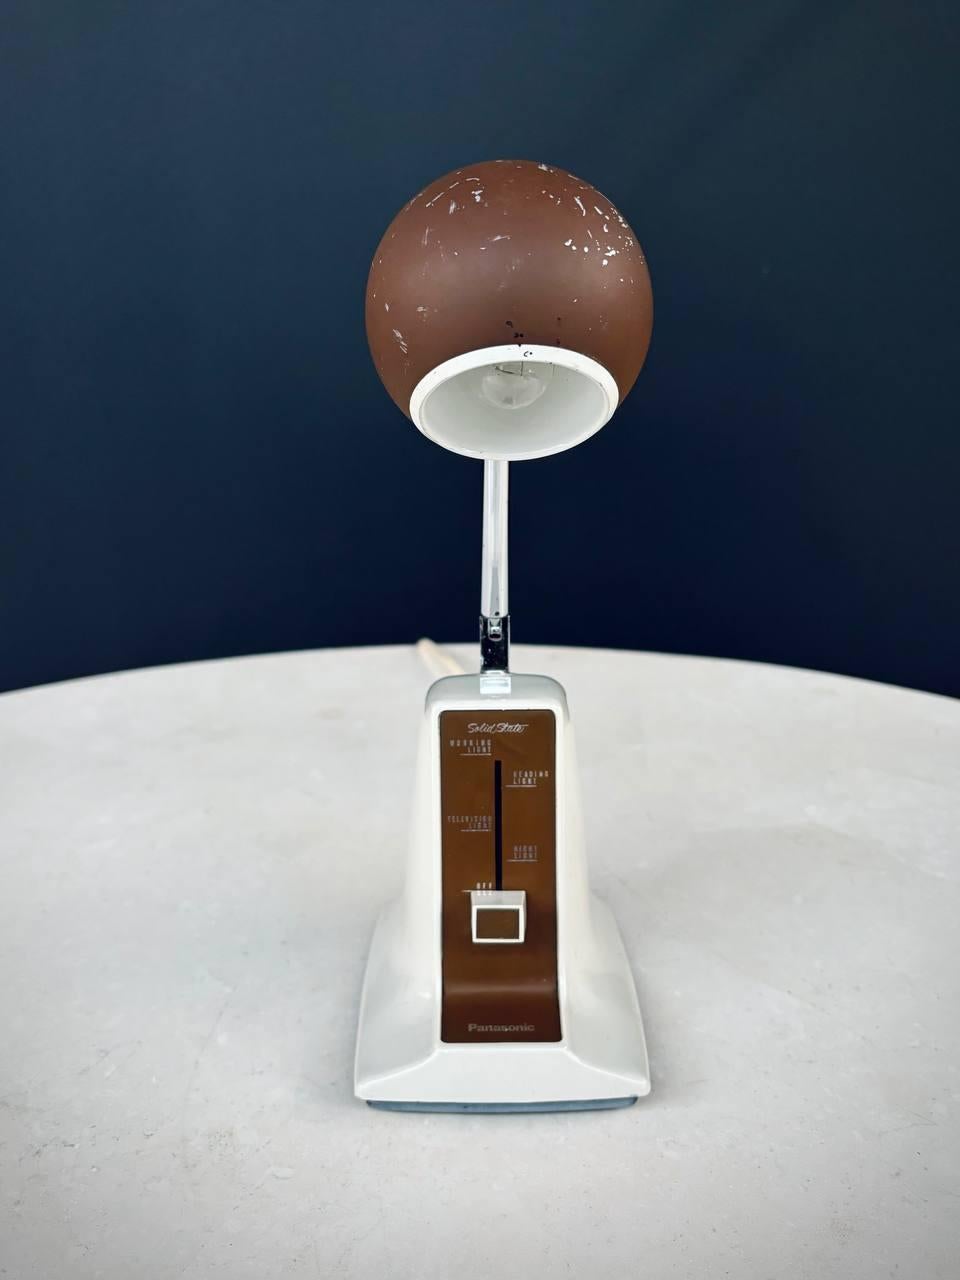 Vintage Space Age Multi-Directional Telescopic Eyeball Desk Lamp by Panasonic In Good Condition For Sale In Los Angeles, CA